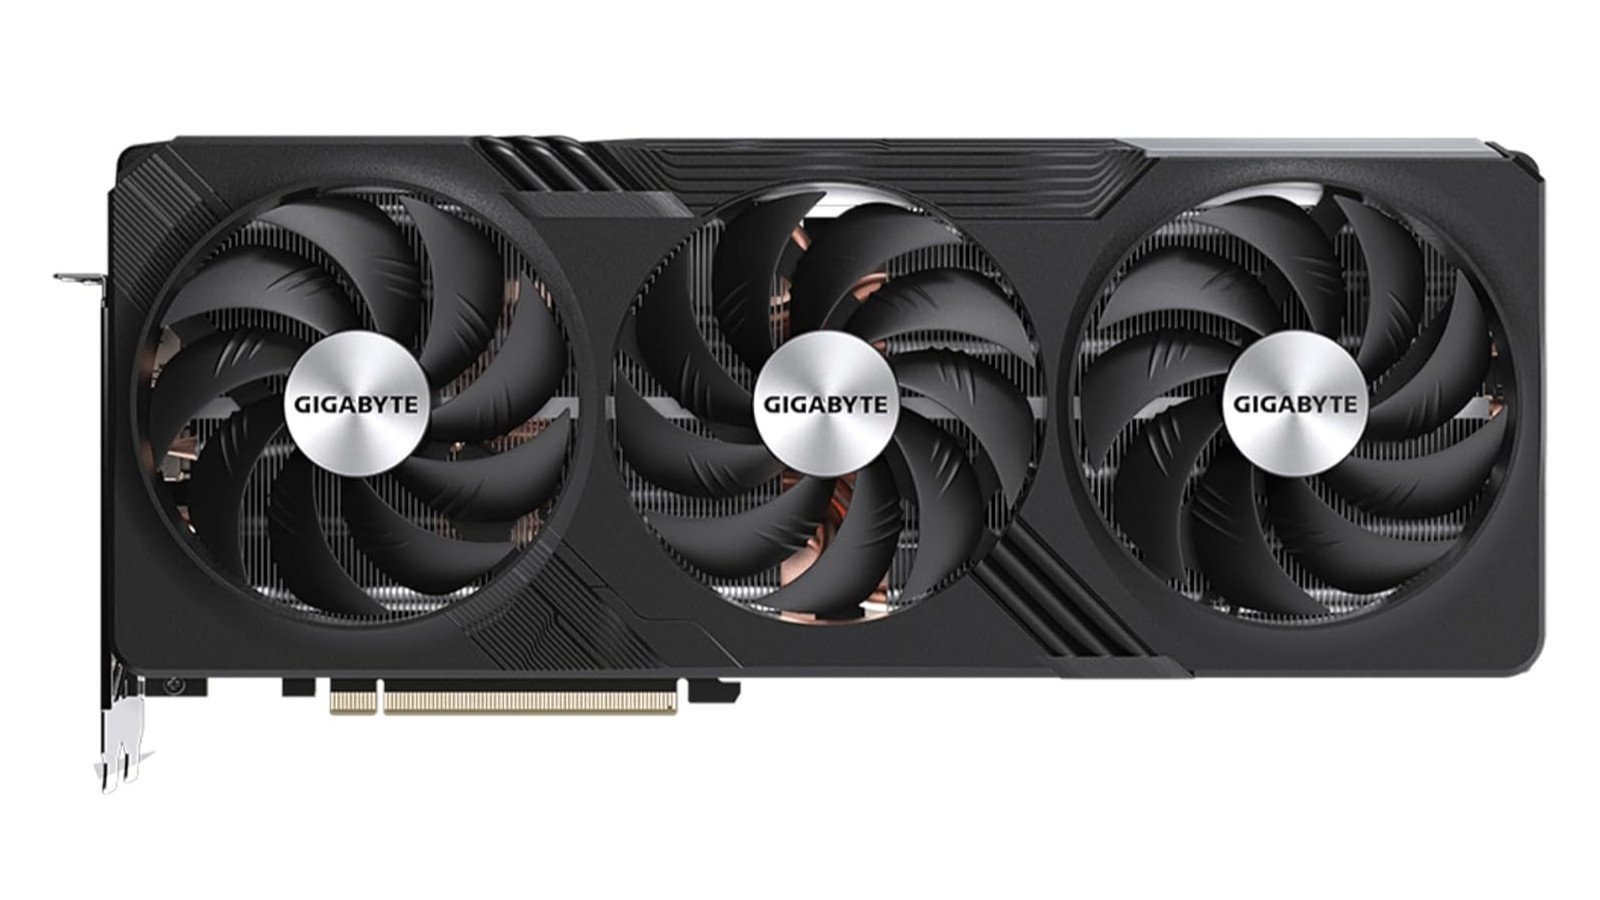 Gigabyte Radeon RX 7900 XTX graphics card product photo against a white background.